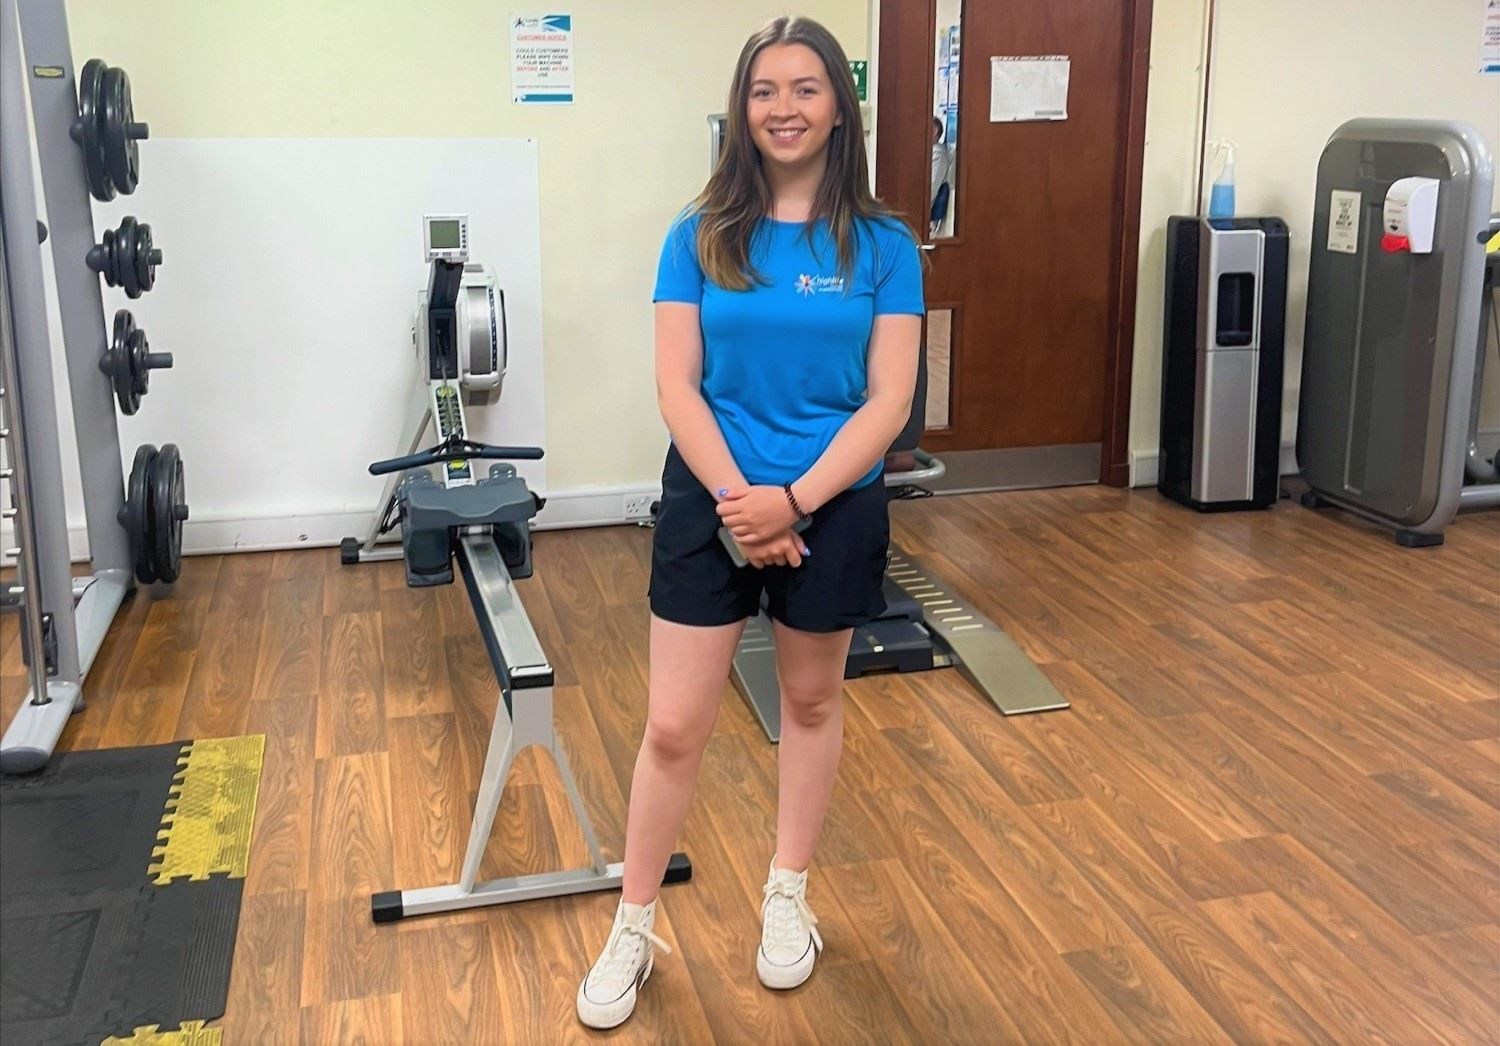 Olivia Saunders joins the HLH team as a personal trainer from next week onwards.